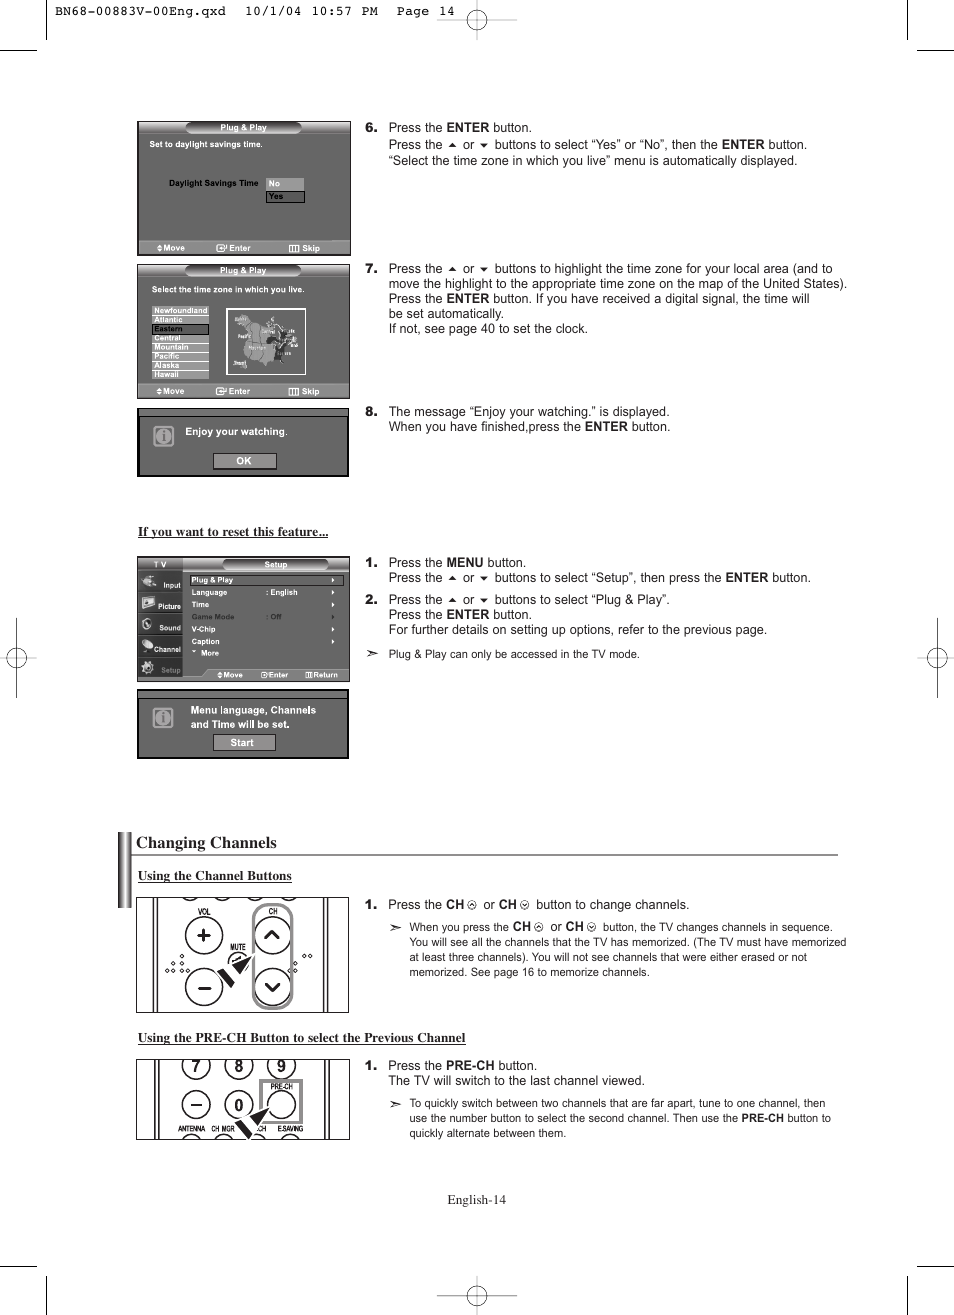 Changing channels | Samsung LNS3238DX-XAA User Manual | Page 16 / 182